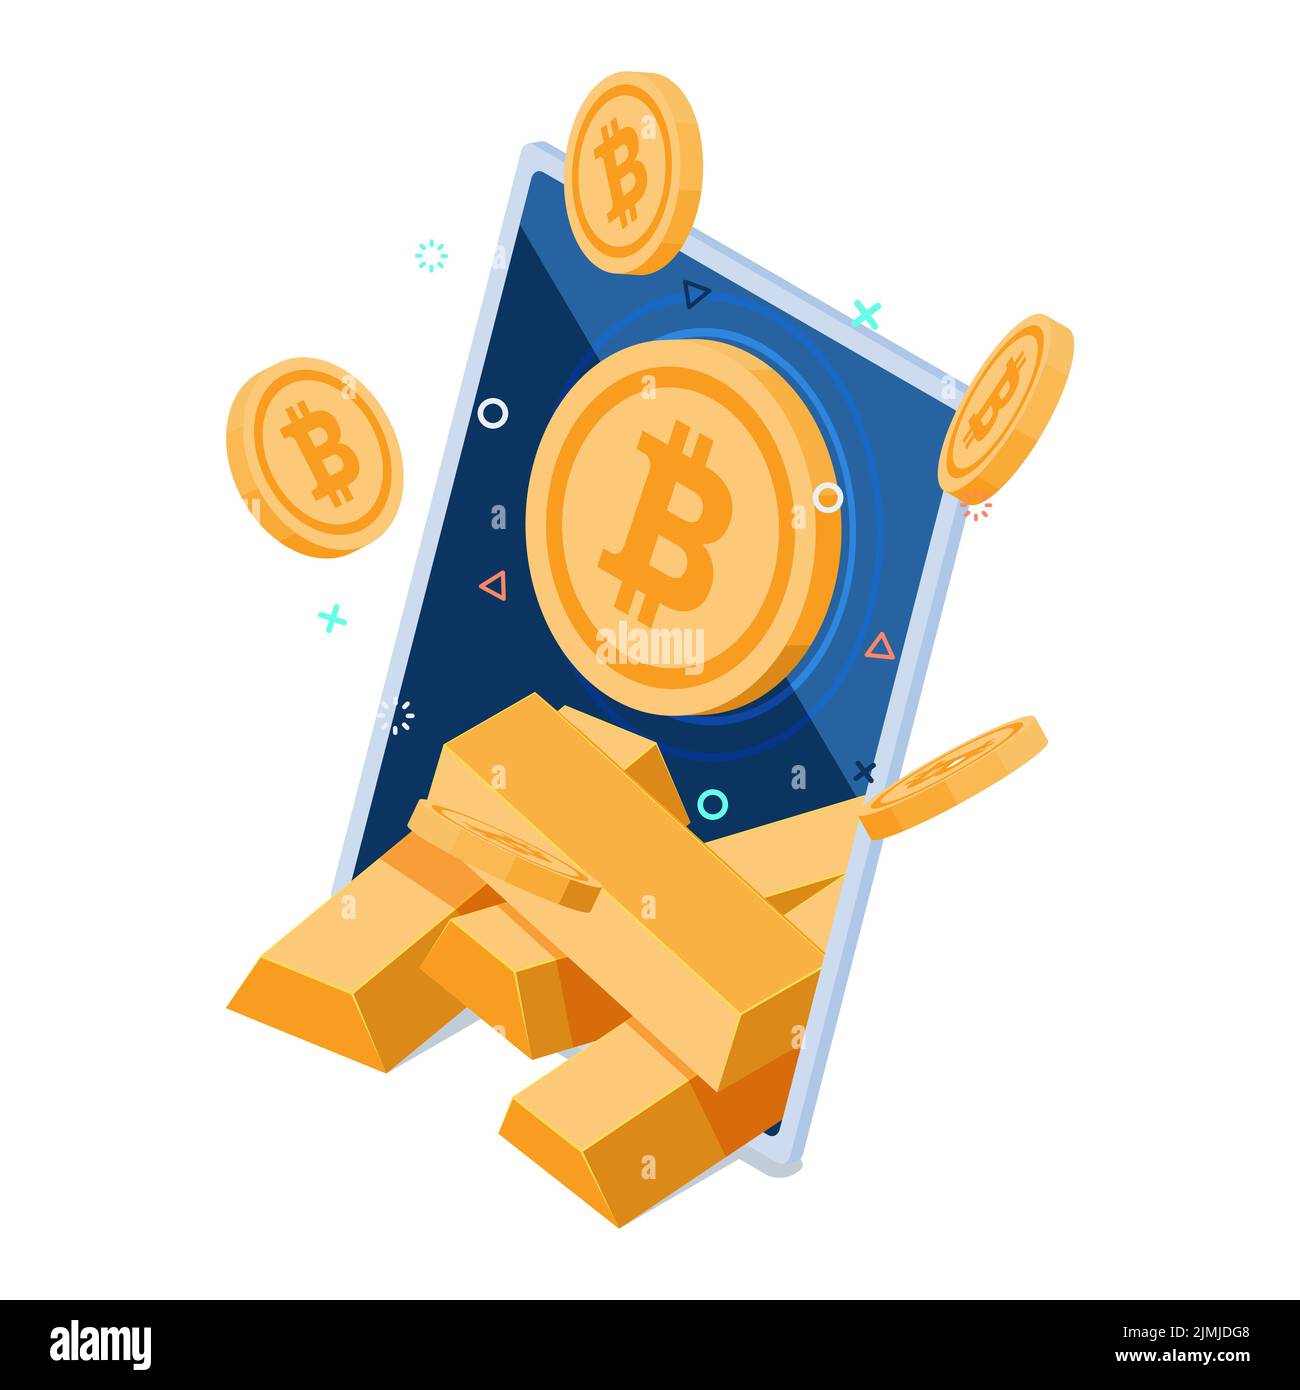 Flat 3d Isometric Bitcoin with Gold Bar Inside Smartphone. Bitcoin is Often Referred to as Digital Gold. Cryptocurrency and Blockchain Technology Conc Stock Vector